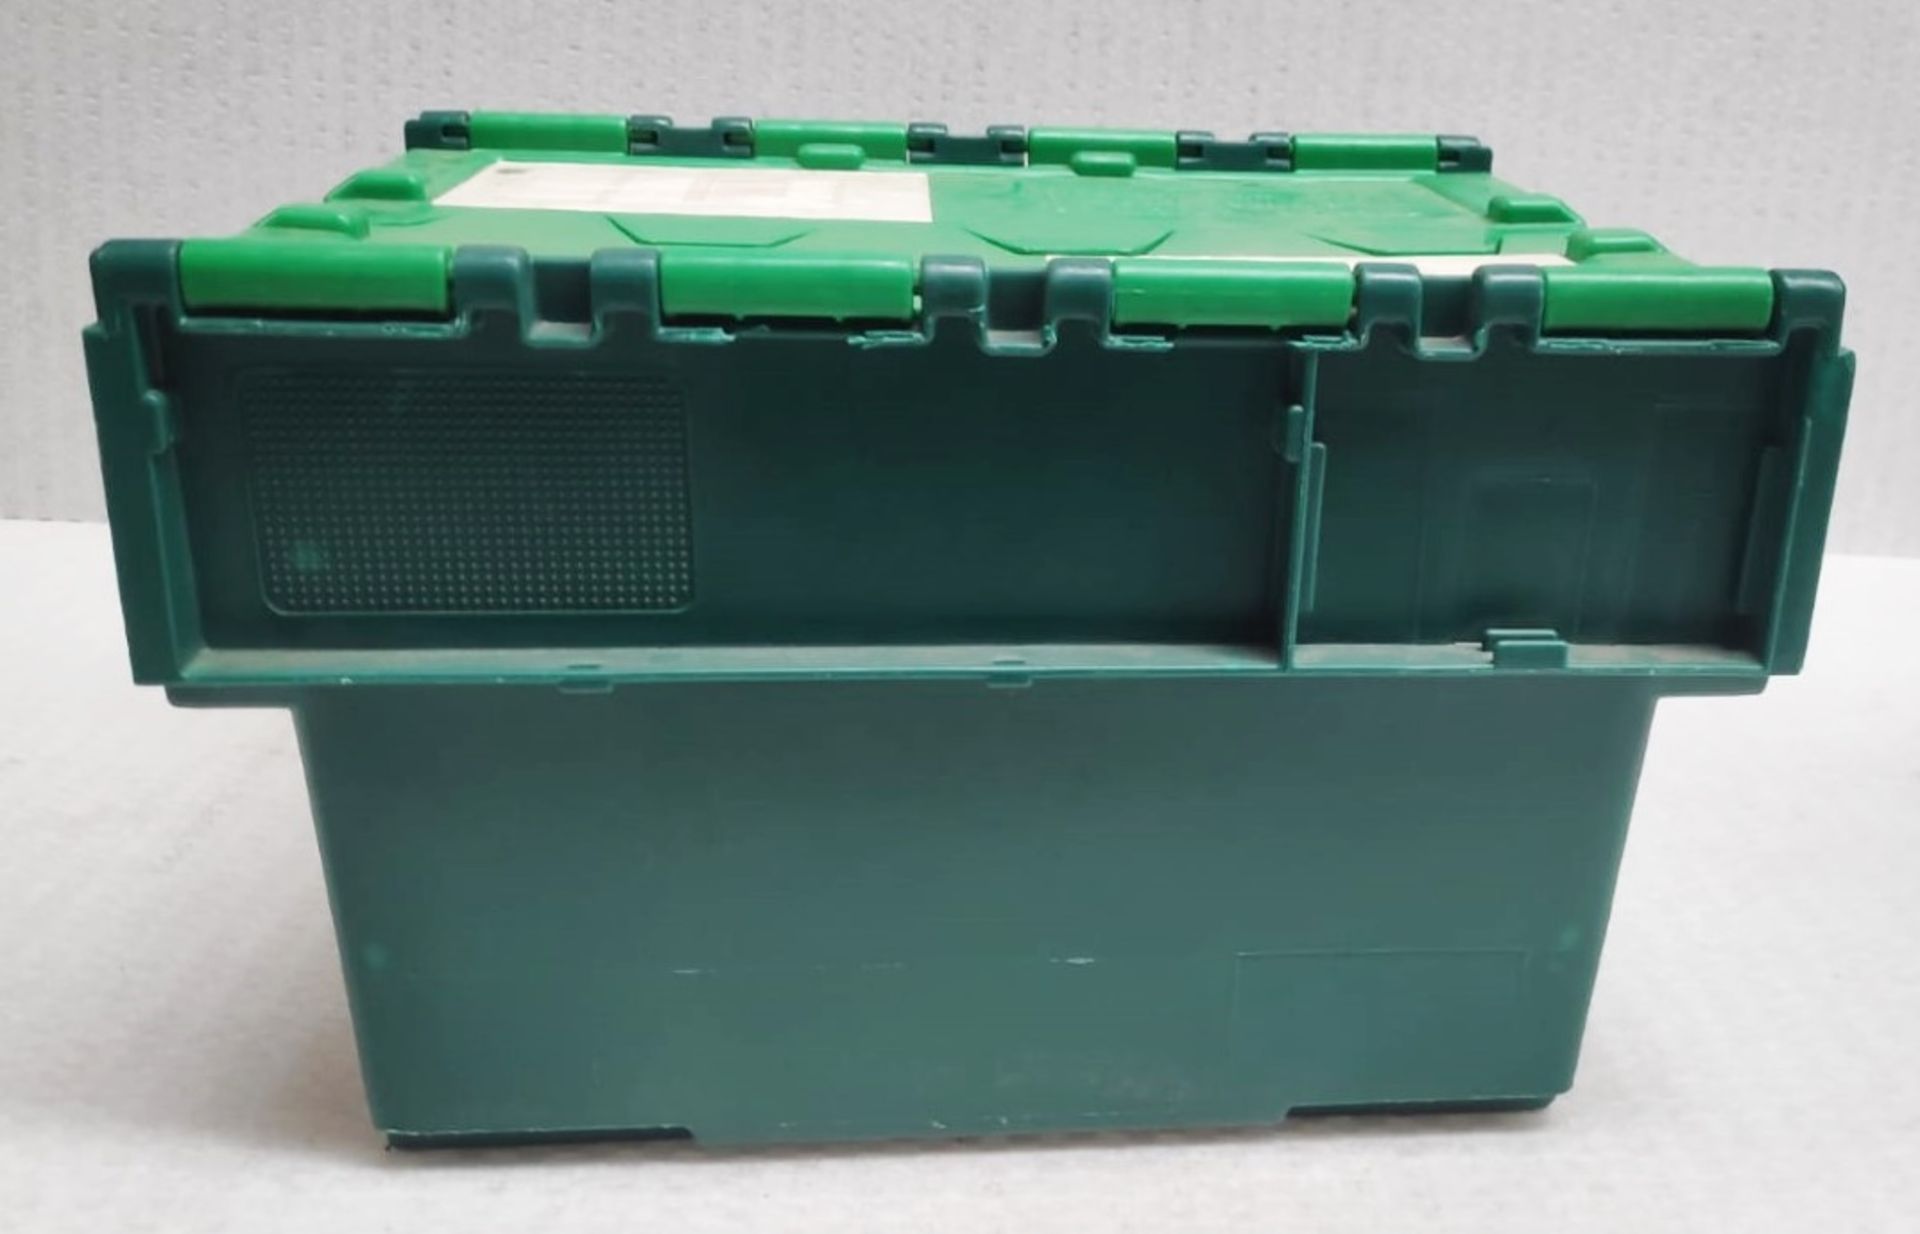 20 x Robust Compact Green Plastic Stackable Secure Storage Boxes With Attached Hinged Lids - Bild 2 aus 6